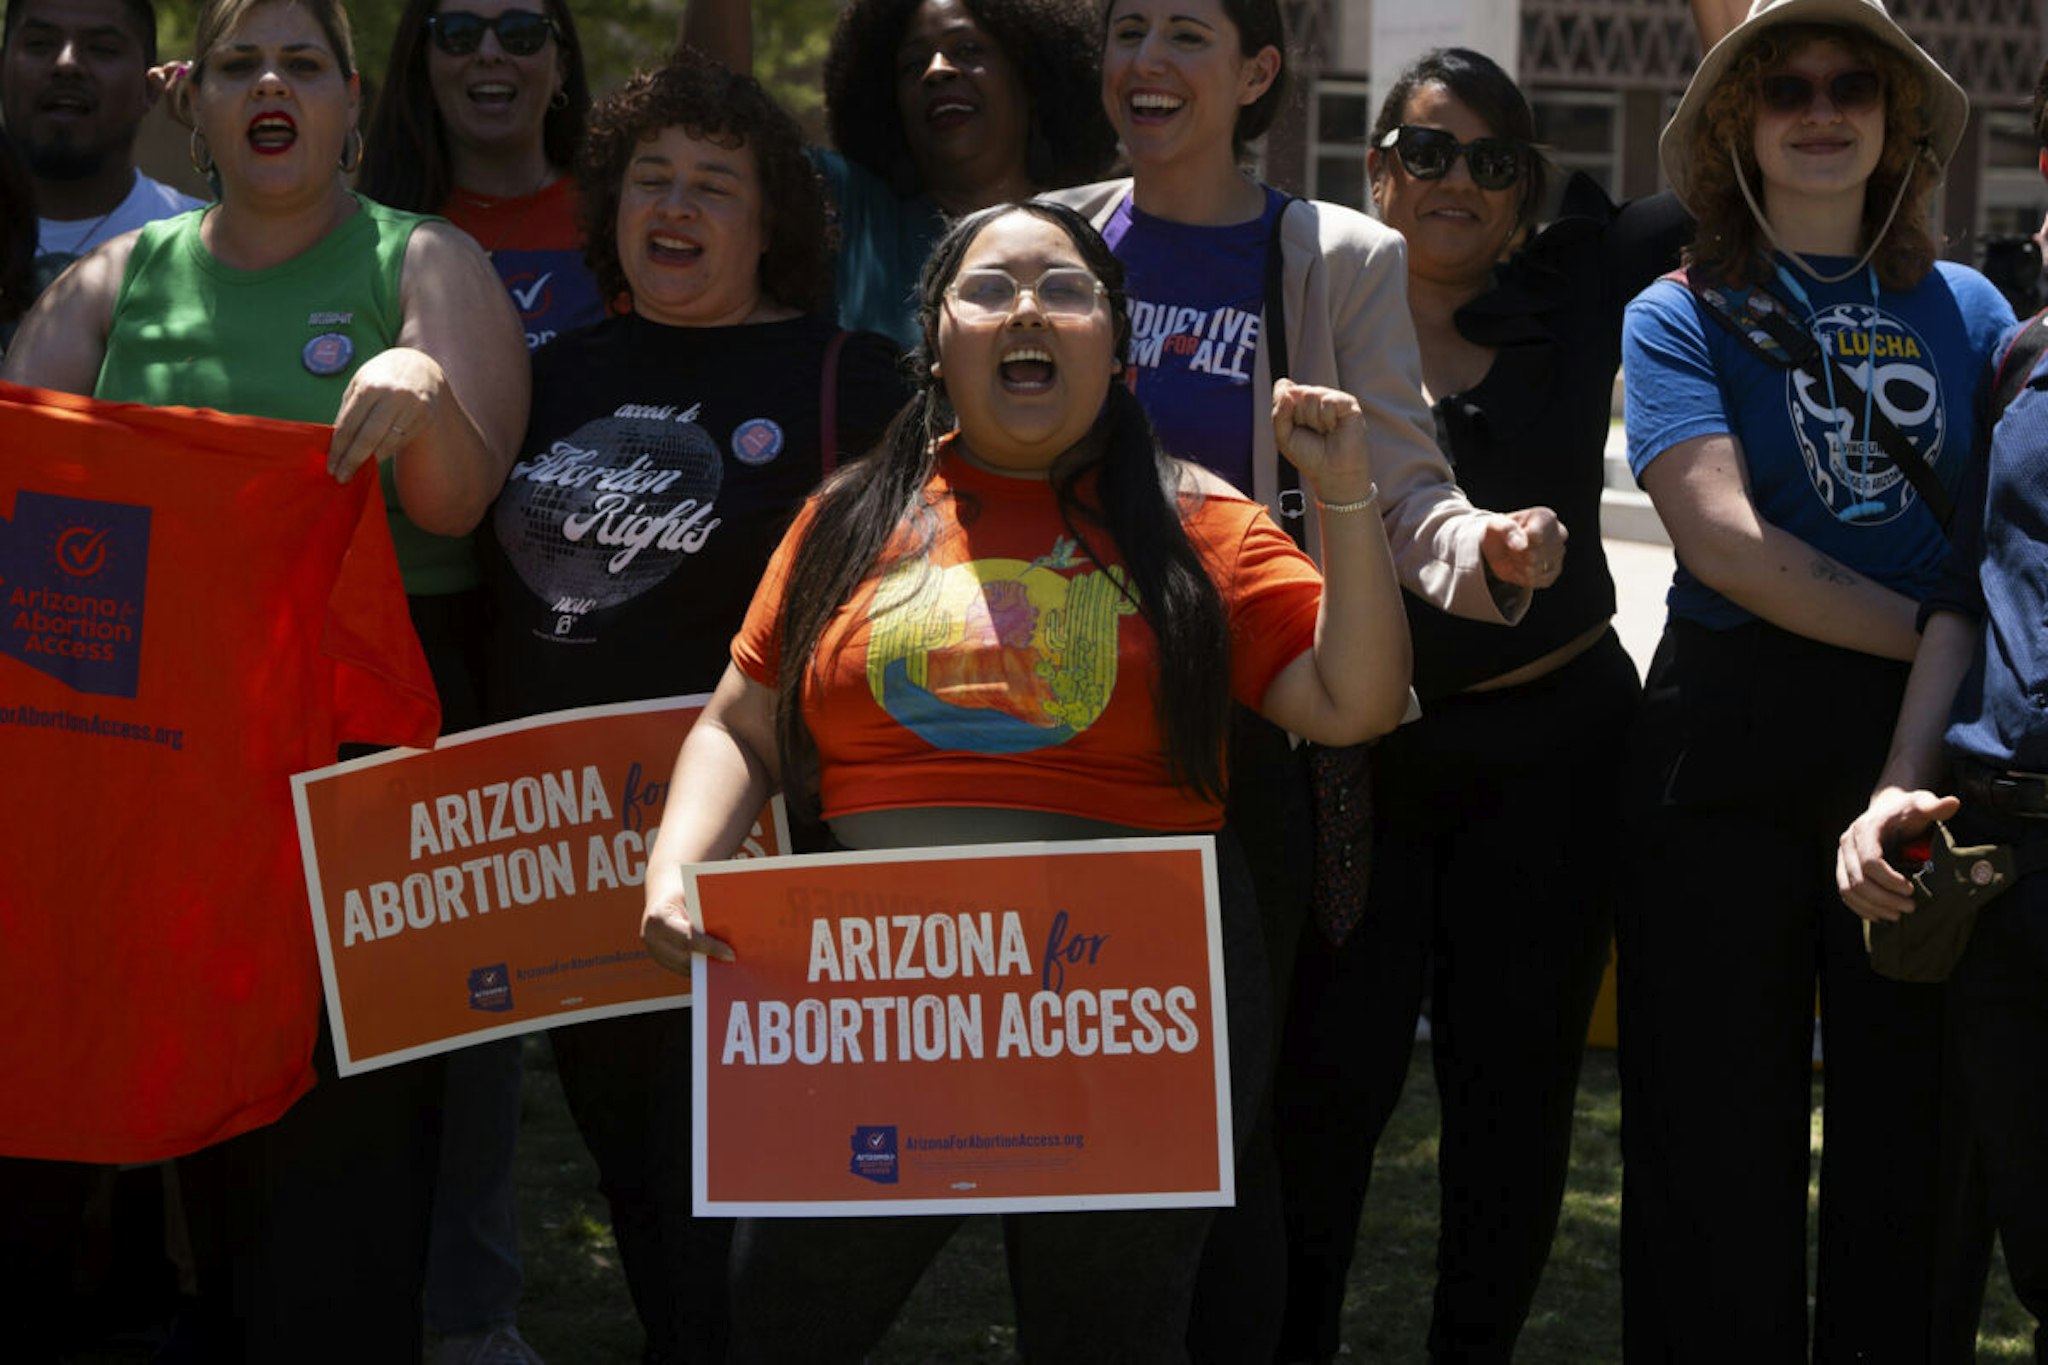 PHOENIX, ARIZONA - APRIL 17: Arizona for Abortion Access, the ballot initiative to enshrine abortion rights in the Arizona State Constitution, holds a press conference and protest condemning Arizona House Republicans and the 1864 abortion ban during a recess from a legislative session at the Arizona House of Representatives on April 17, 2024 in Phoenix, Arizona. Arizona House Republicans blocked the Democrats from holding a vote to overturn the 1864 abortion ban revived last week by the Arizona Supreme Court.